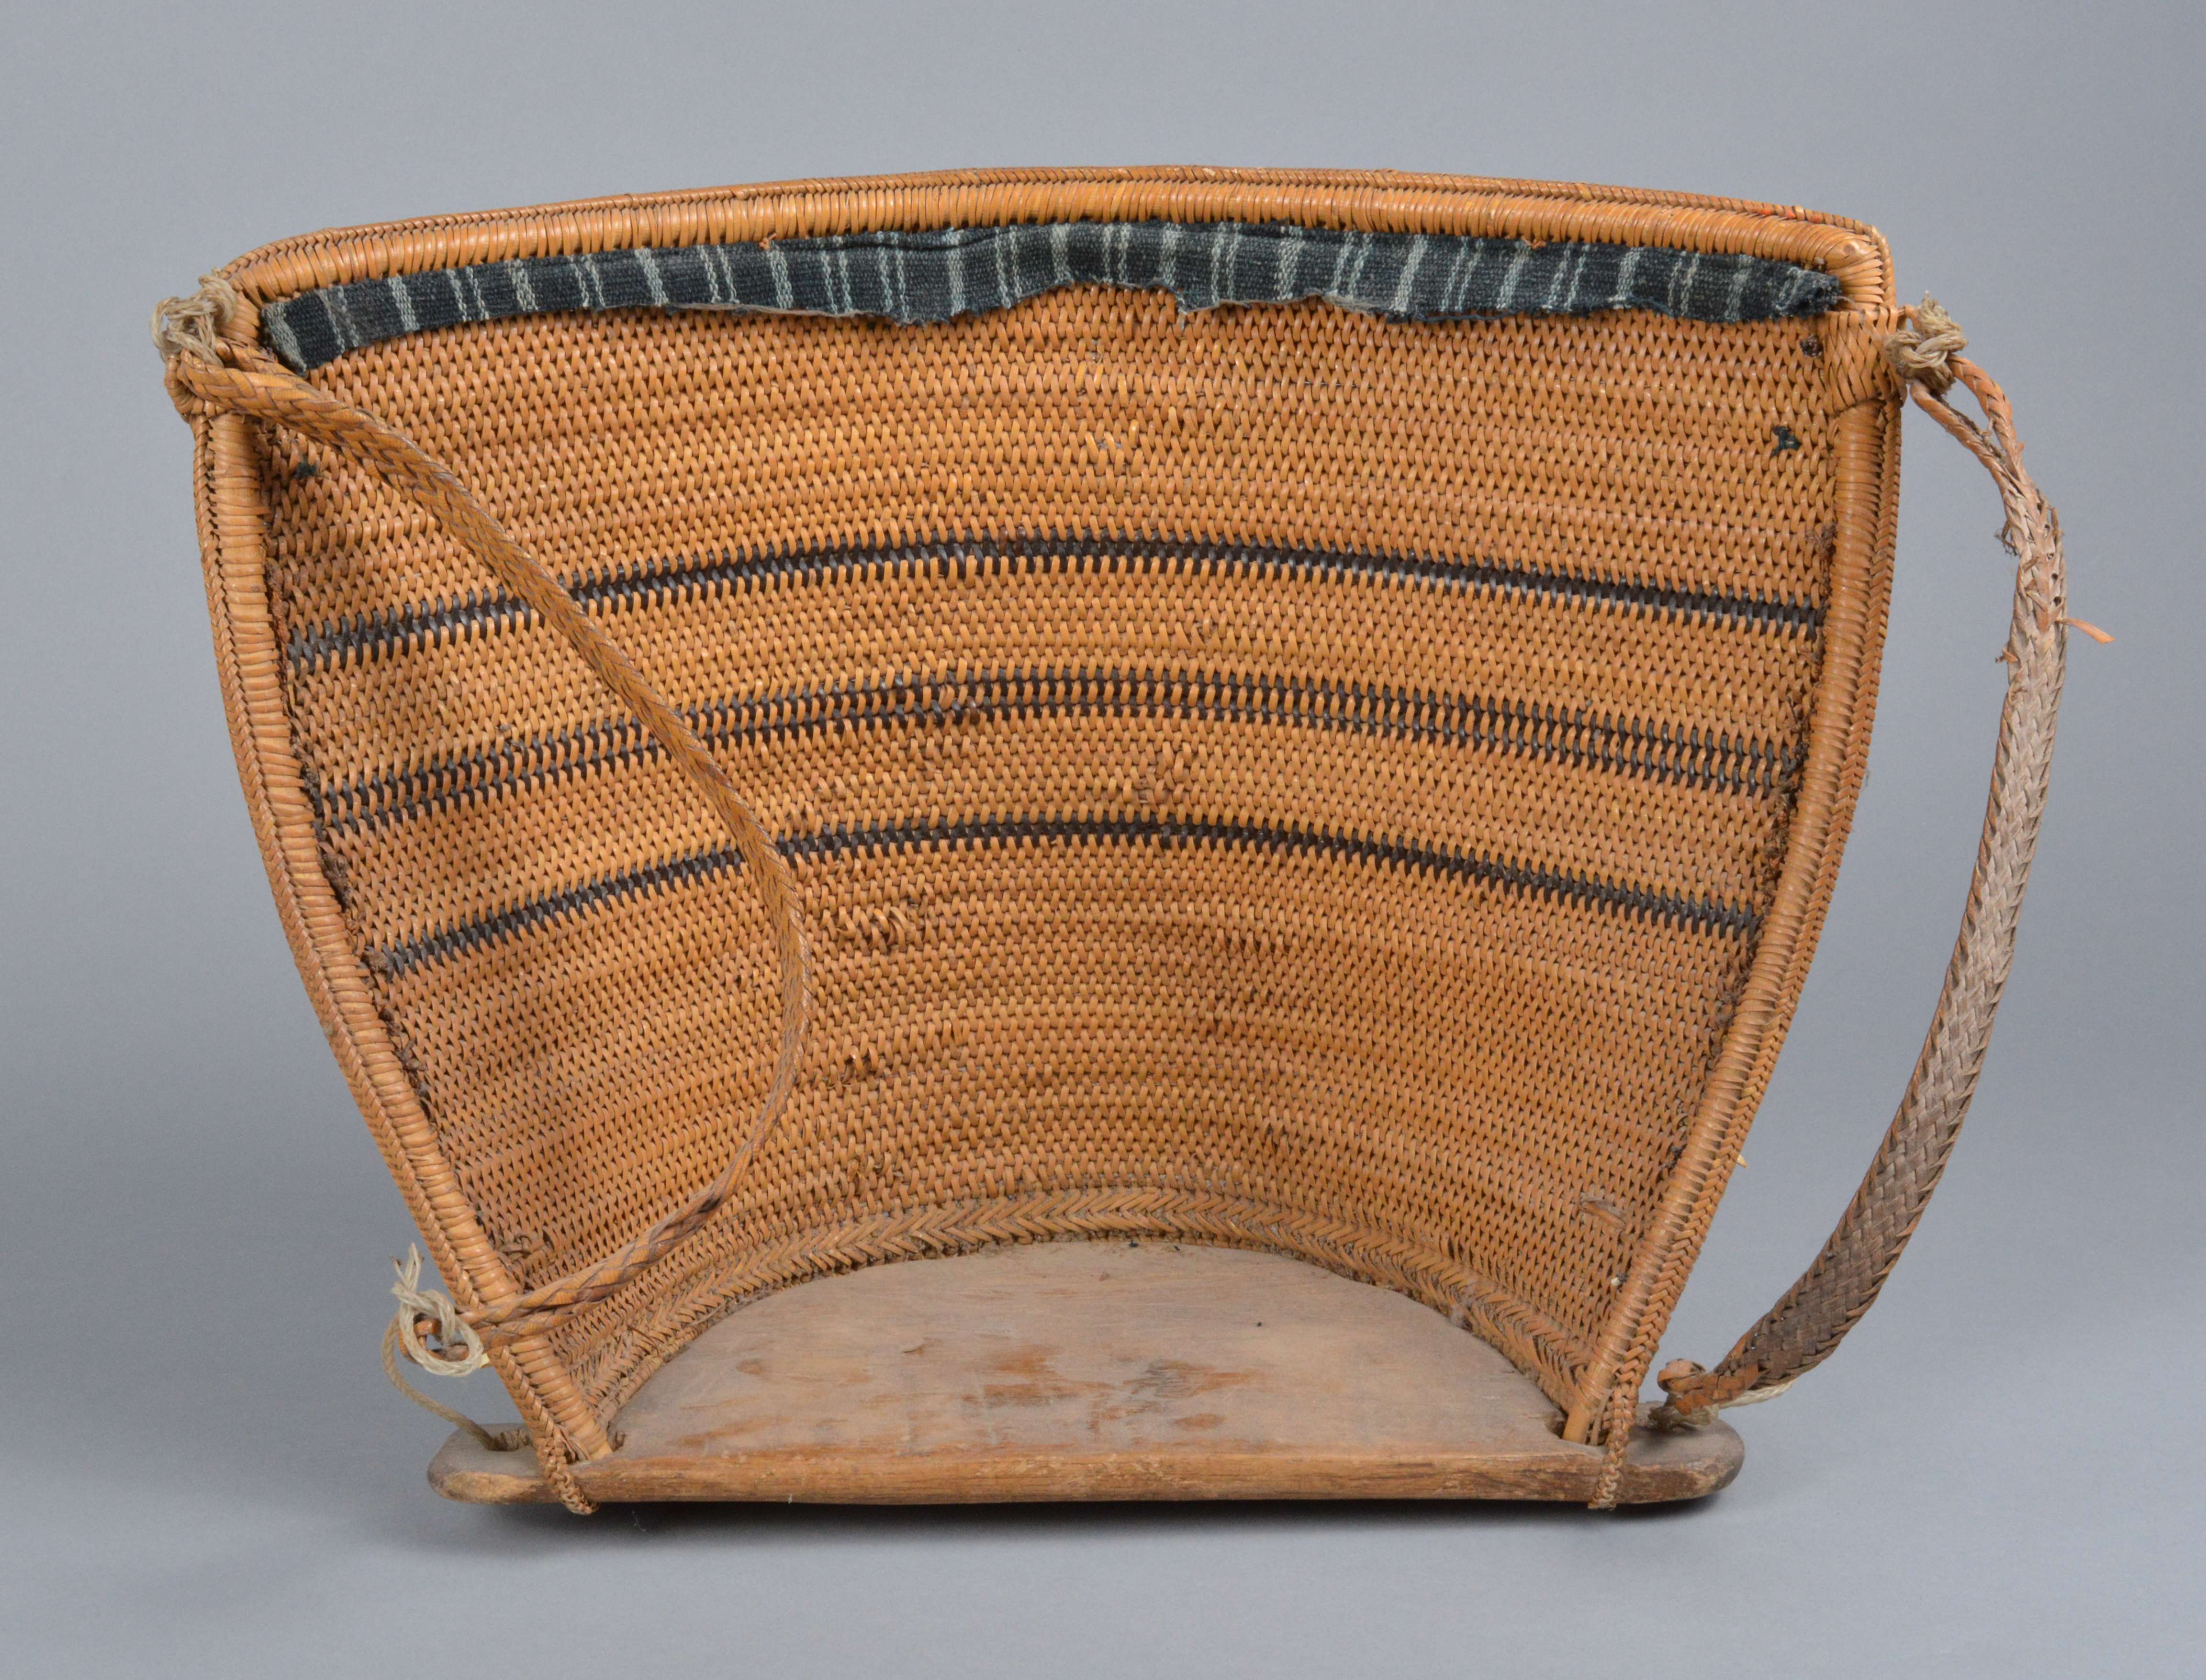 A Dayak baby carrier Borneo, Indonesia the basketry back hung with strings of glass beads, teeth, - Image 2 of 2